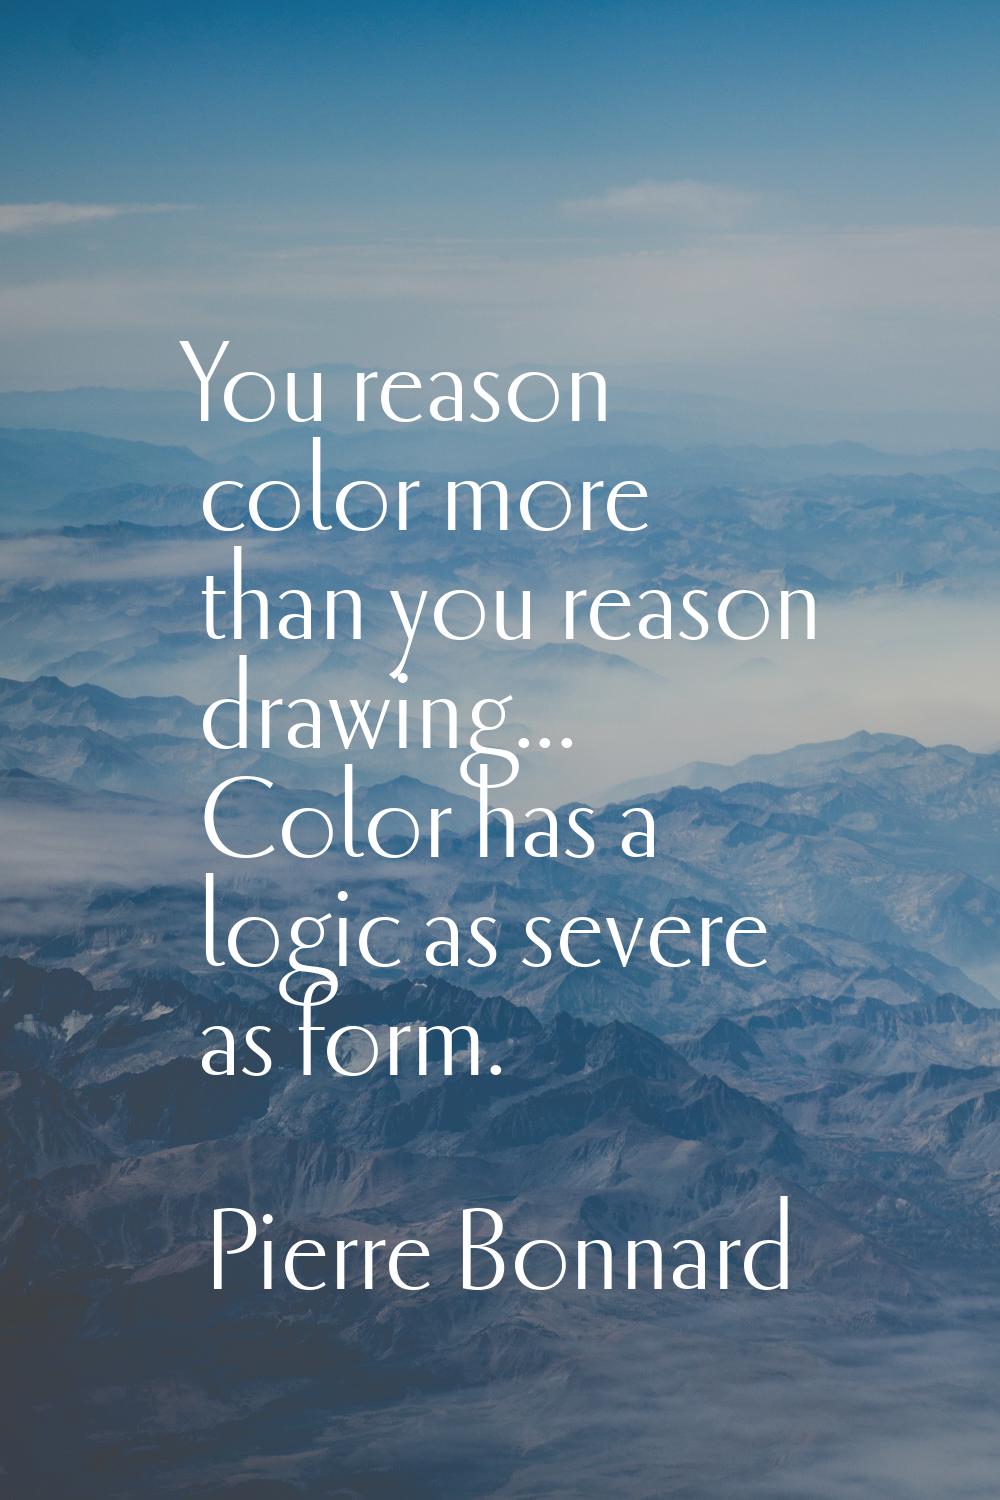 You reason color more than you reason drawing... Color has a logic as severe as form.